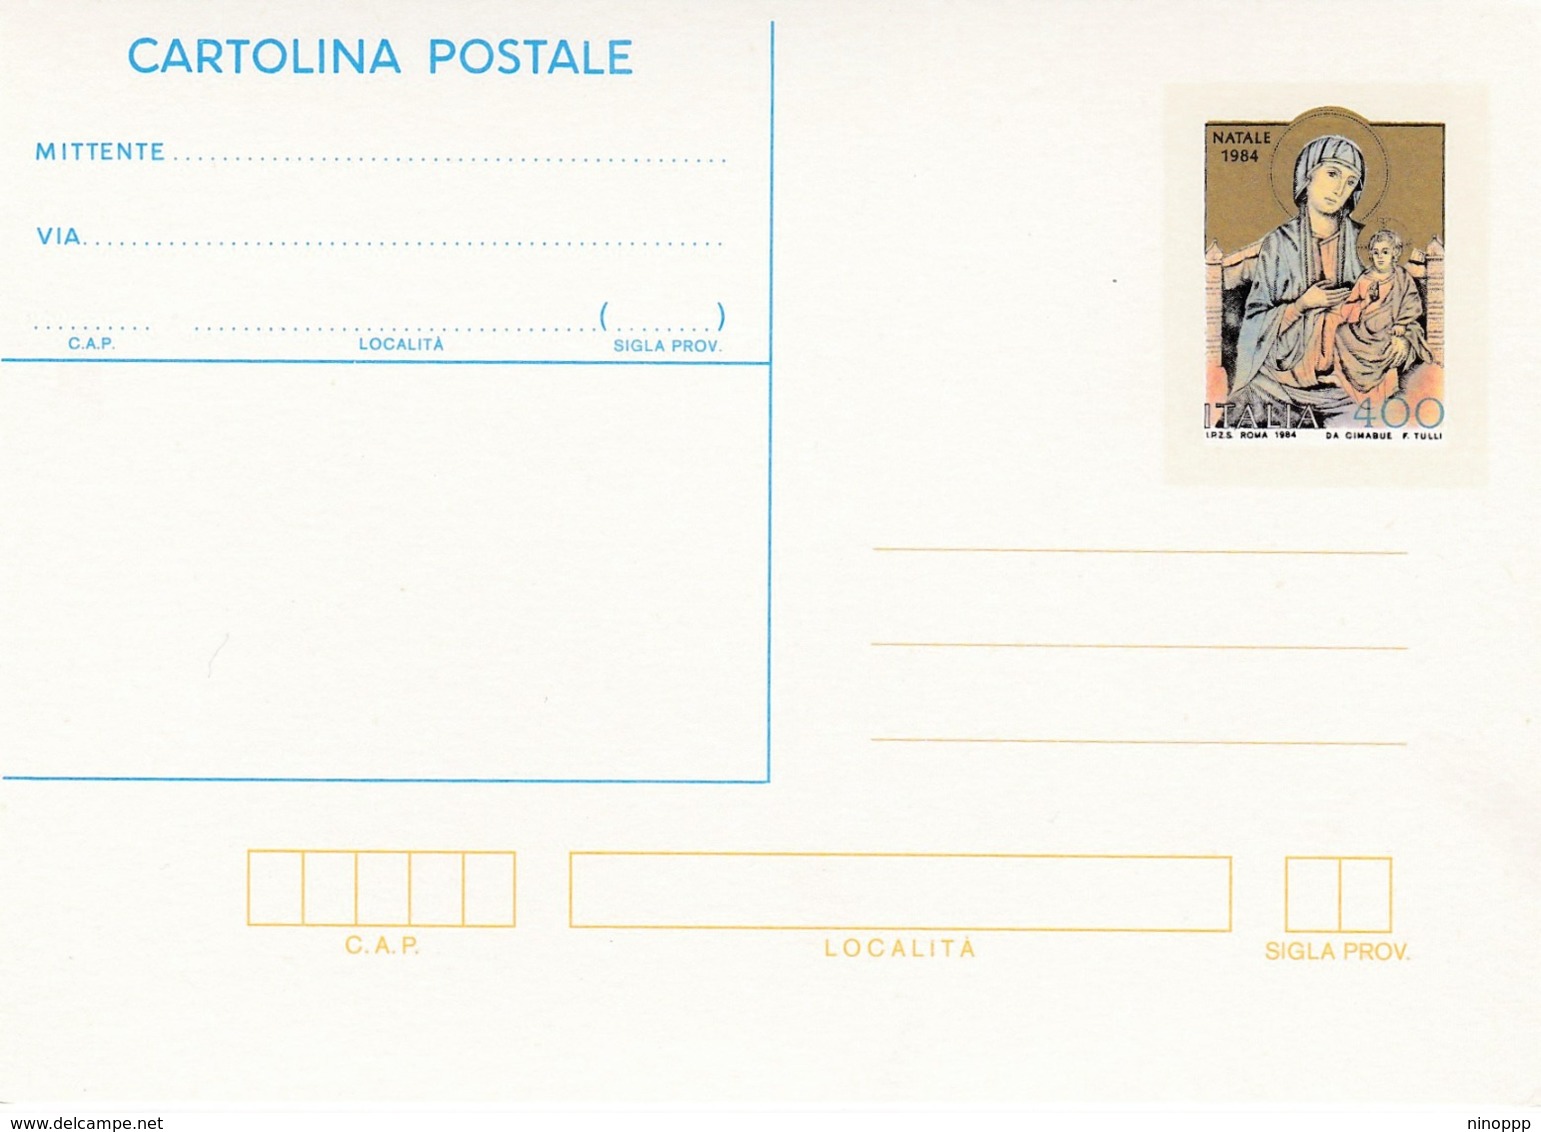 Italy CP 58 1984 Christmas,Cartolina Postale,mint - Stamped Stationery